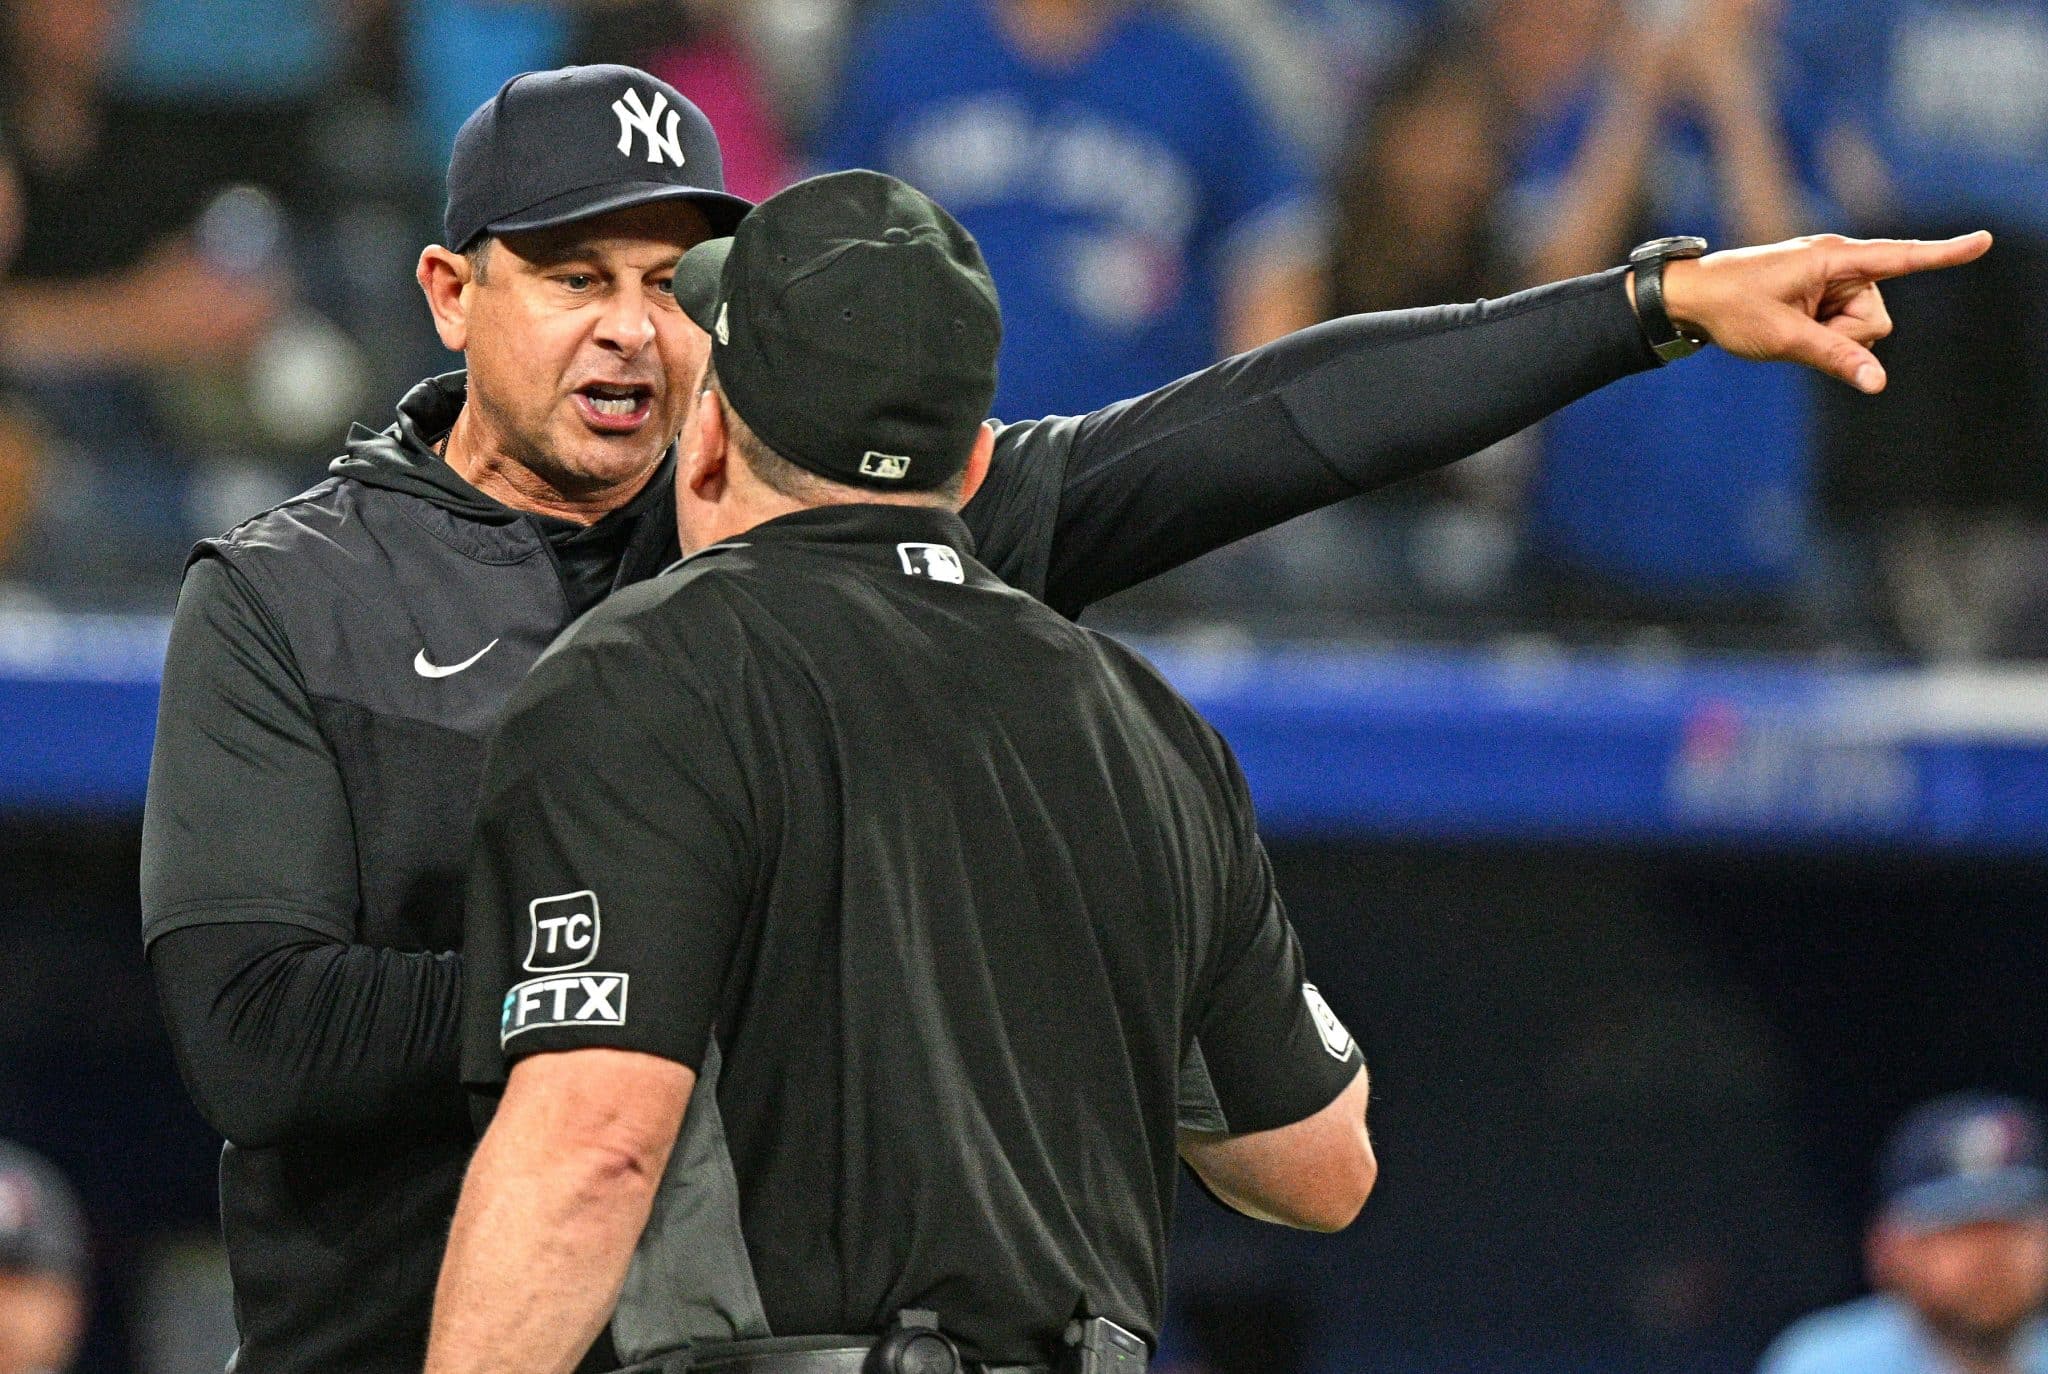 Yankees' Aaron Boone: Embarrassed by post-ejection display - ESPN